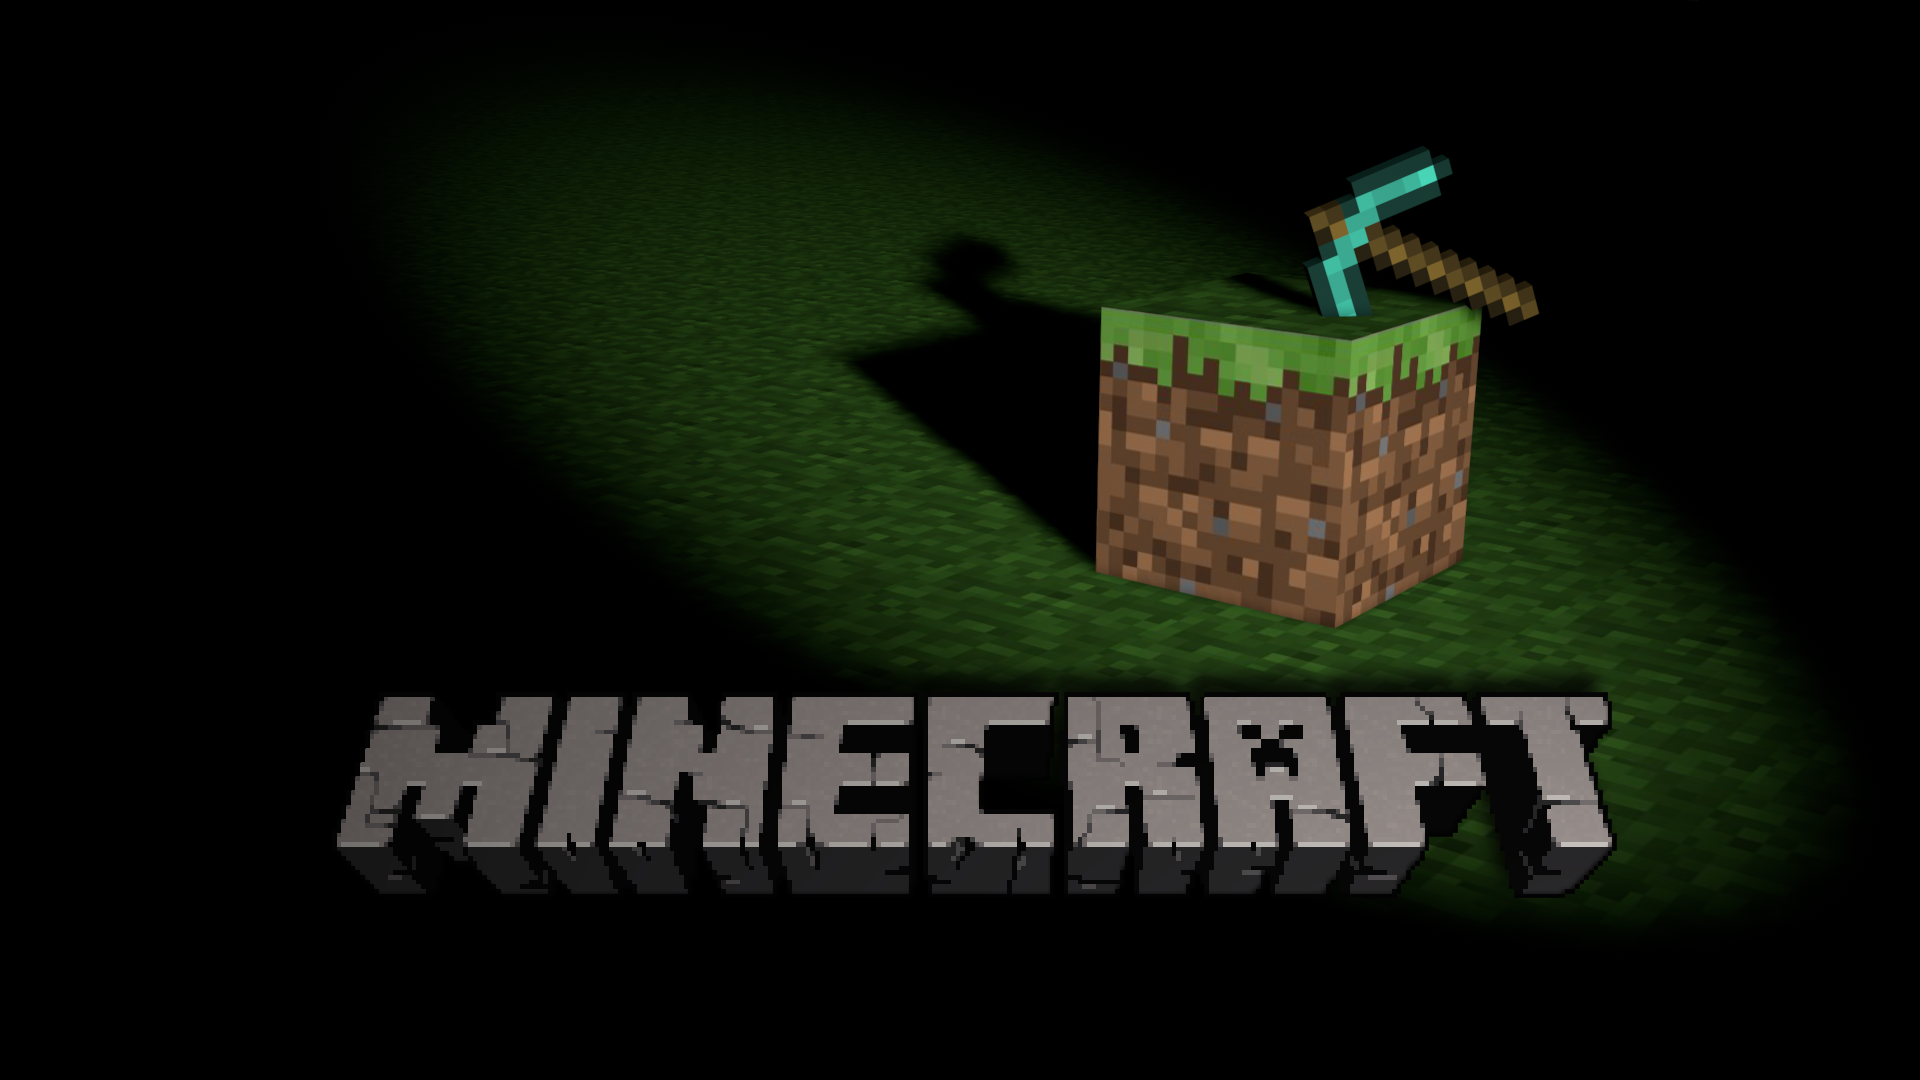 Cool Minecraft Backgrounds for Your Phone   BC GB BaconCape   Gaming